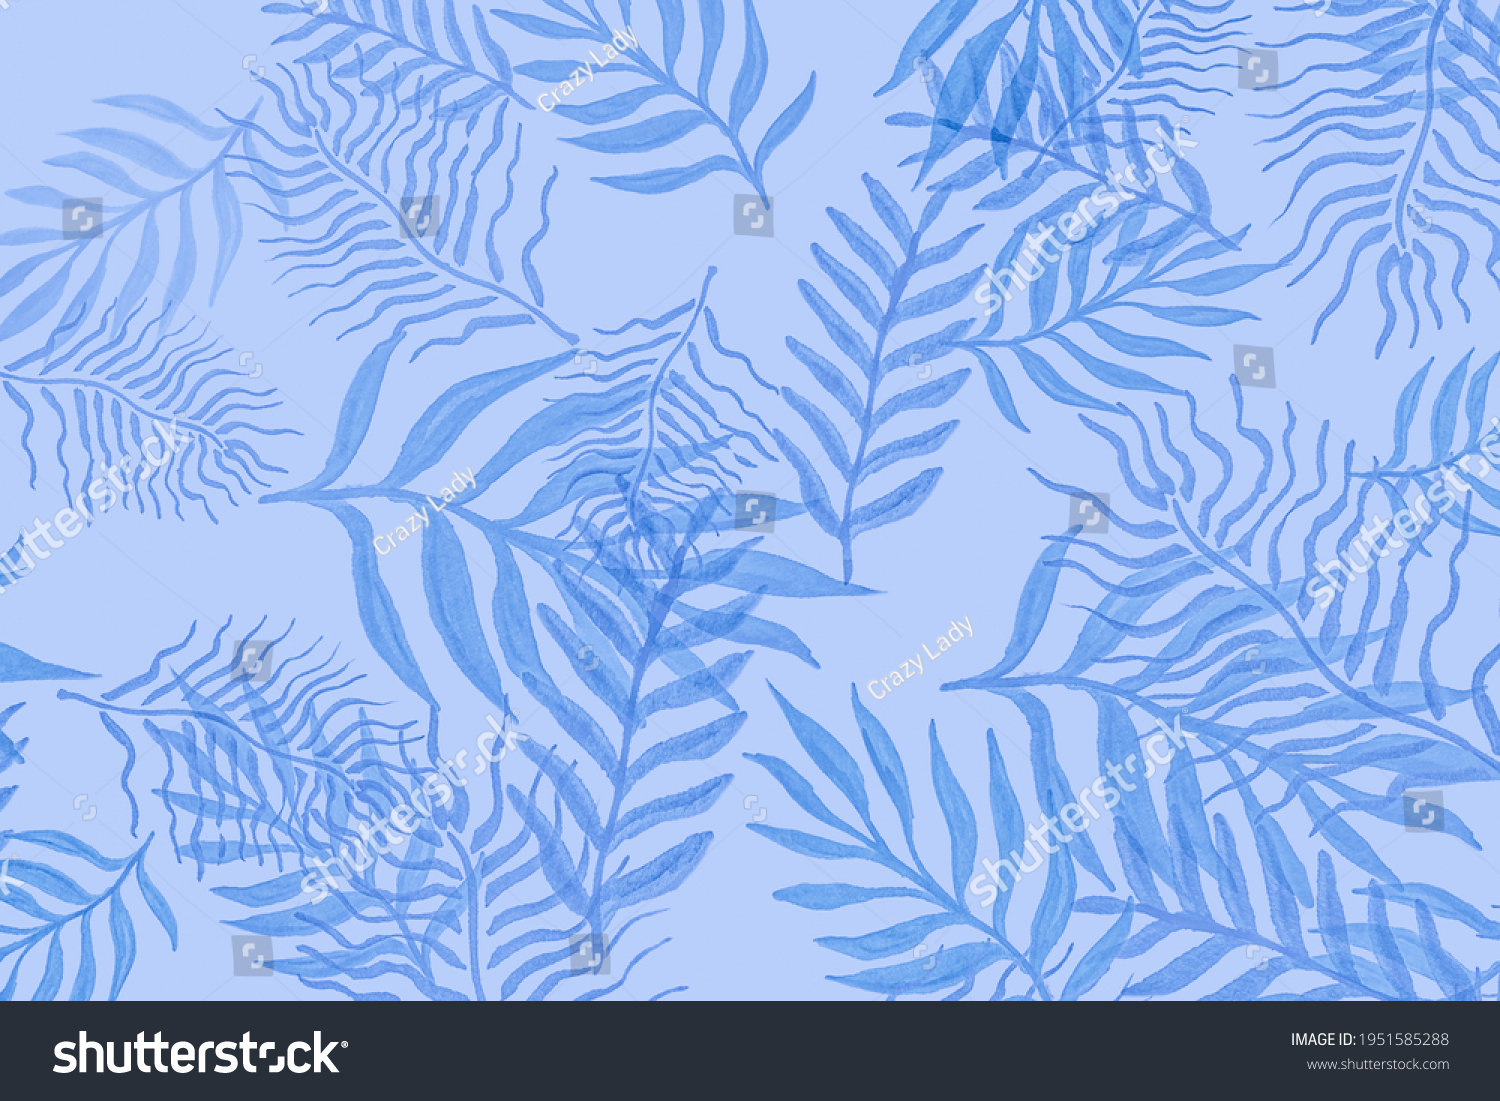 Tropical Illustrations Gray Palm Leaf Drawings Stock Illustration